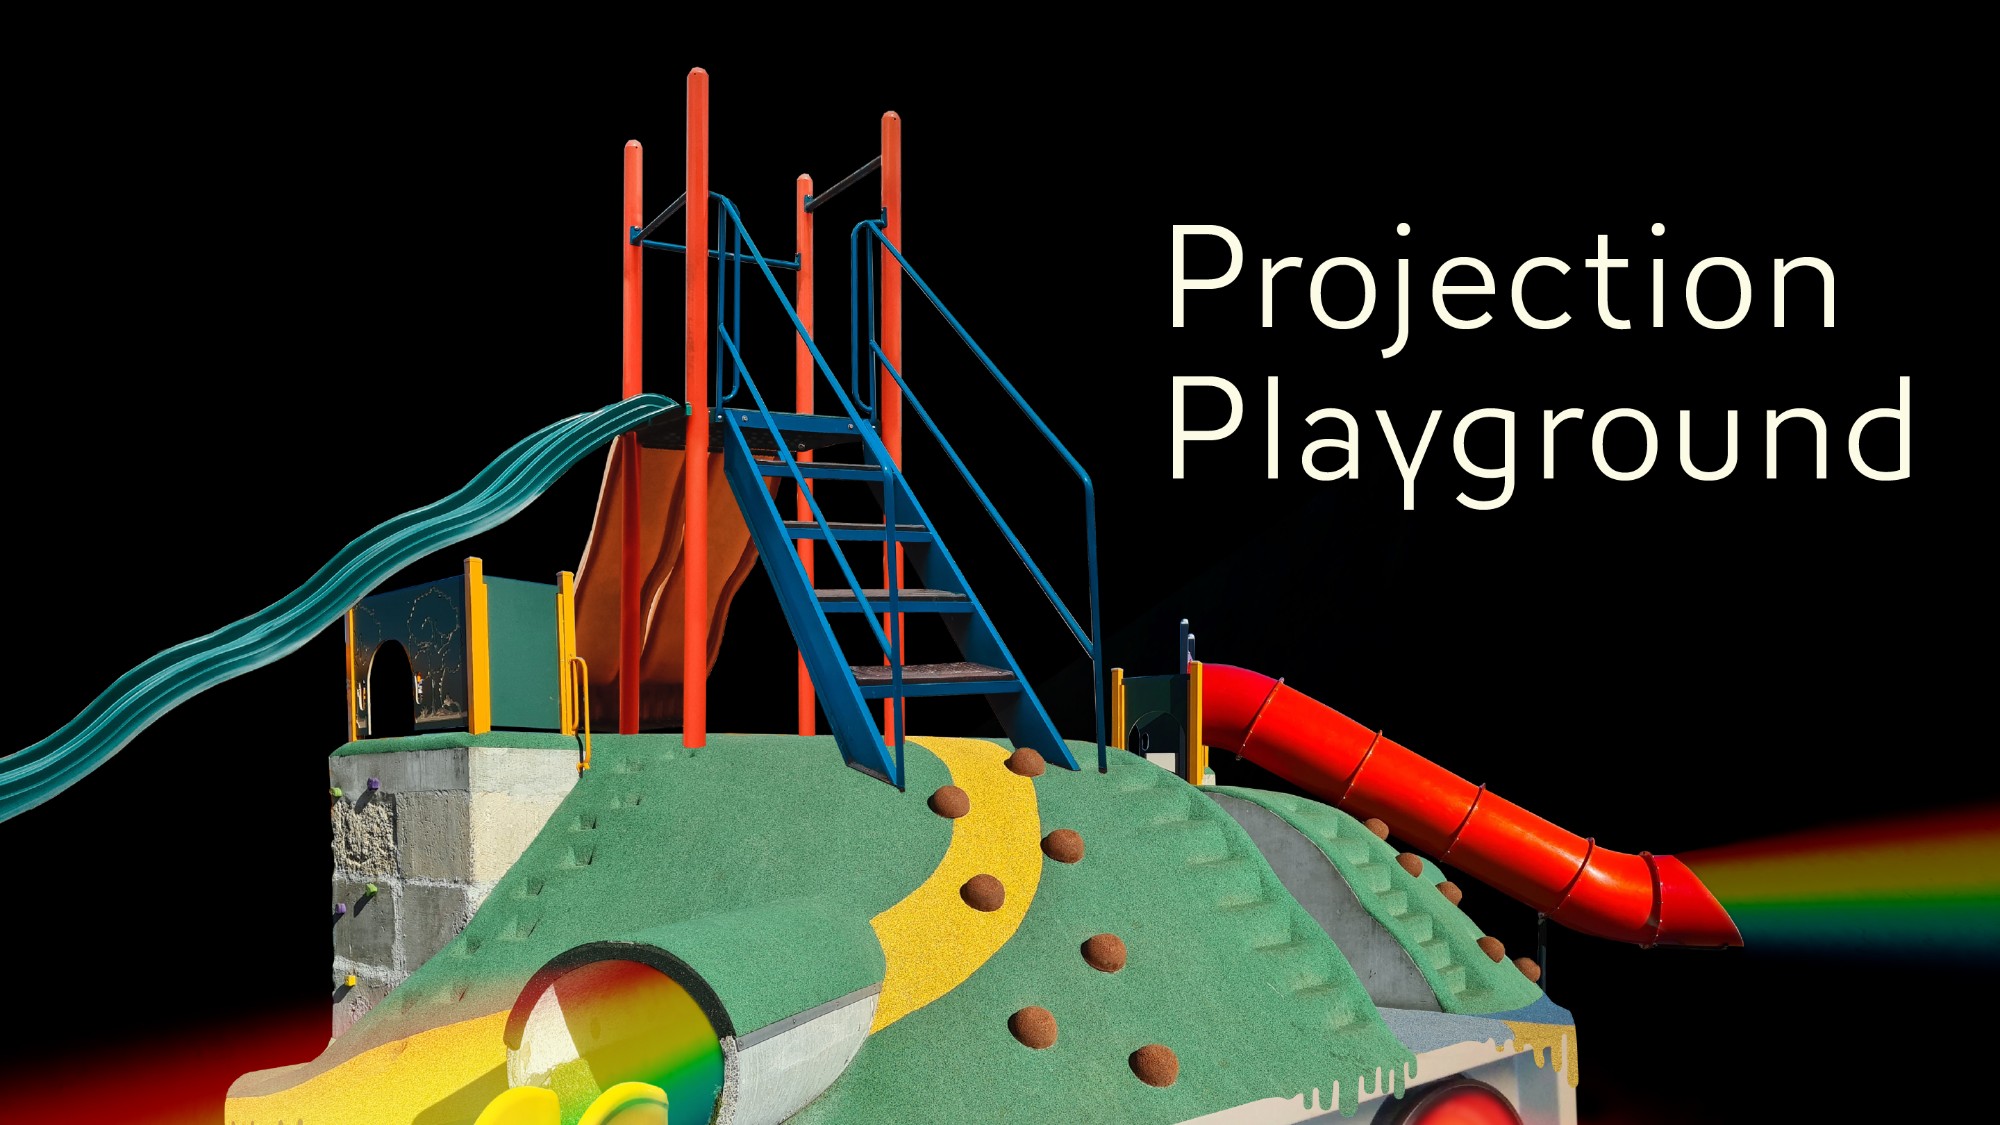 Projection Playground